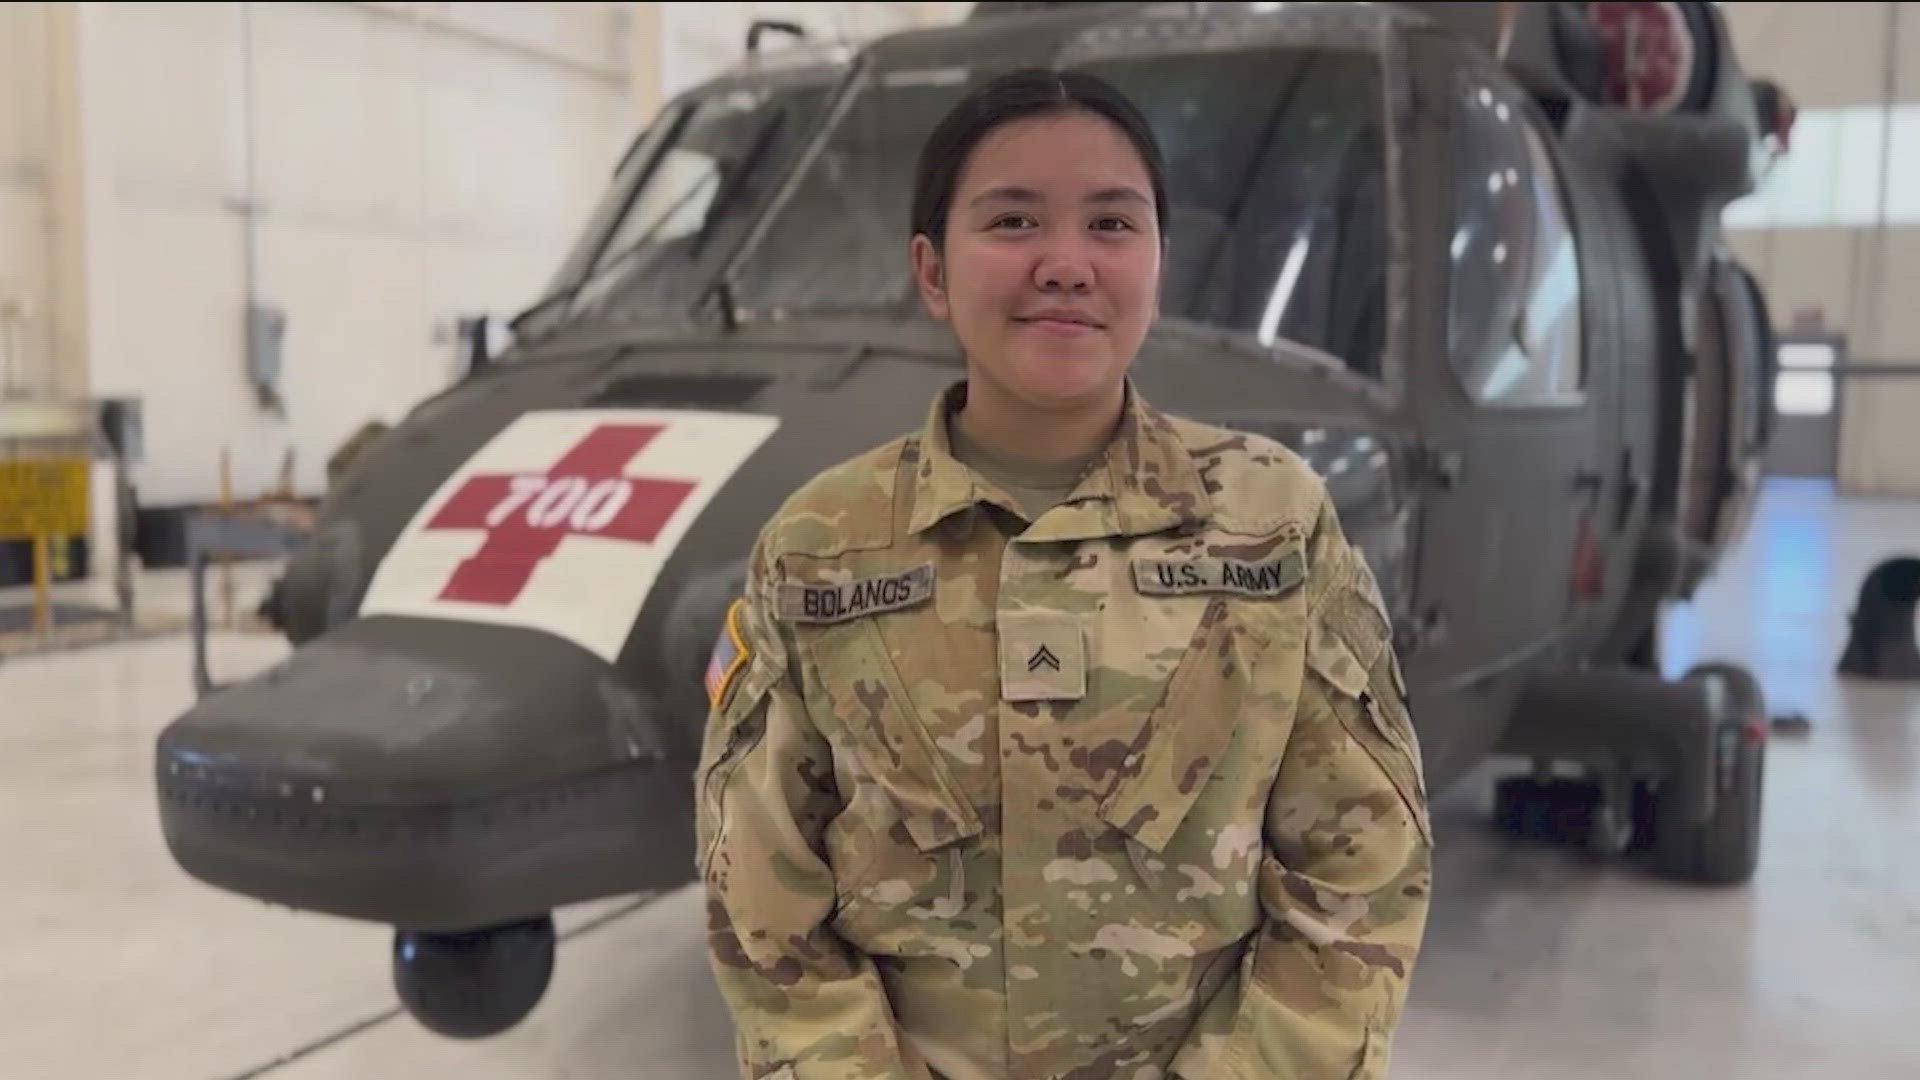 Cpl. Emilie Marie Eve Bolanos, 23, was part of the 101st Airborne Division Soldiers.